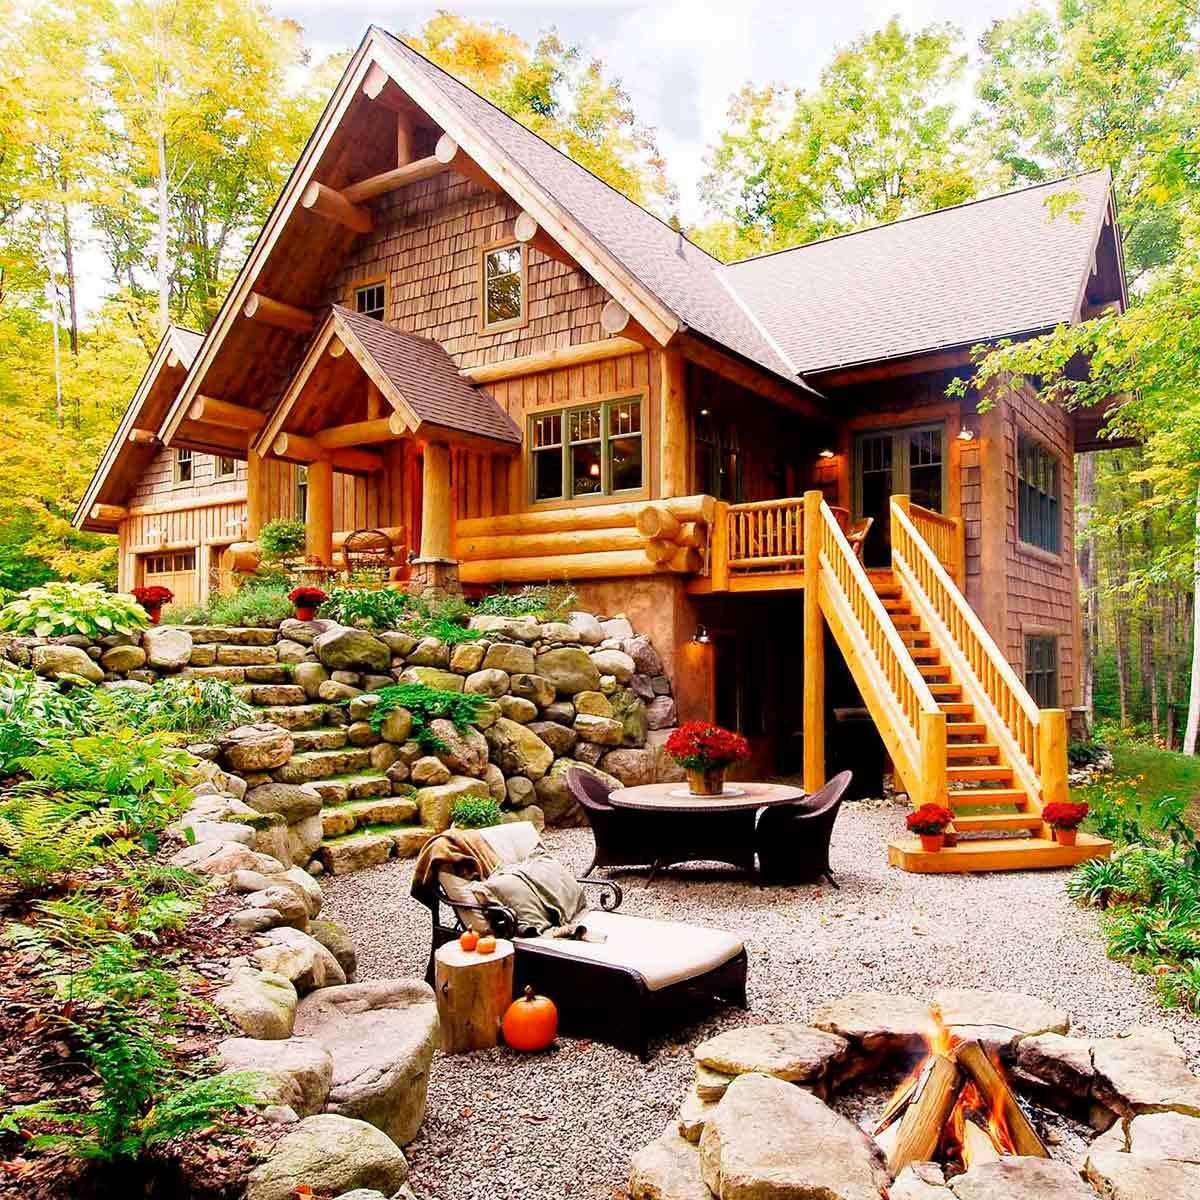 Wooden house on a hill jigsaw puzzle online